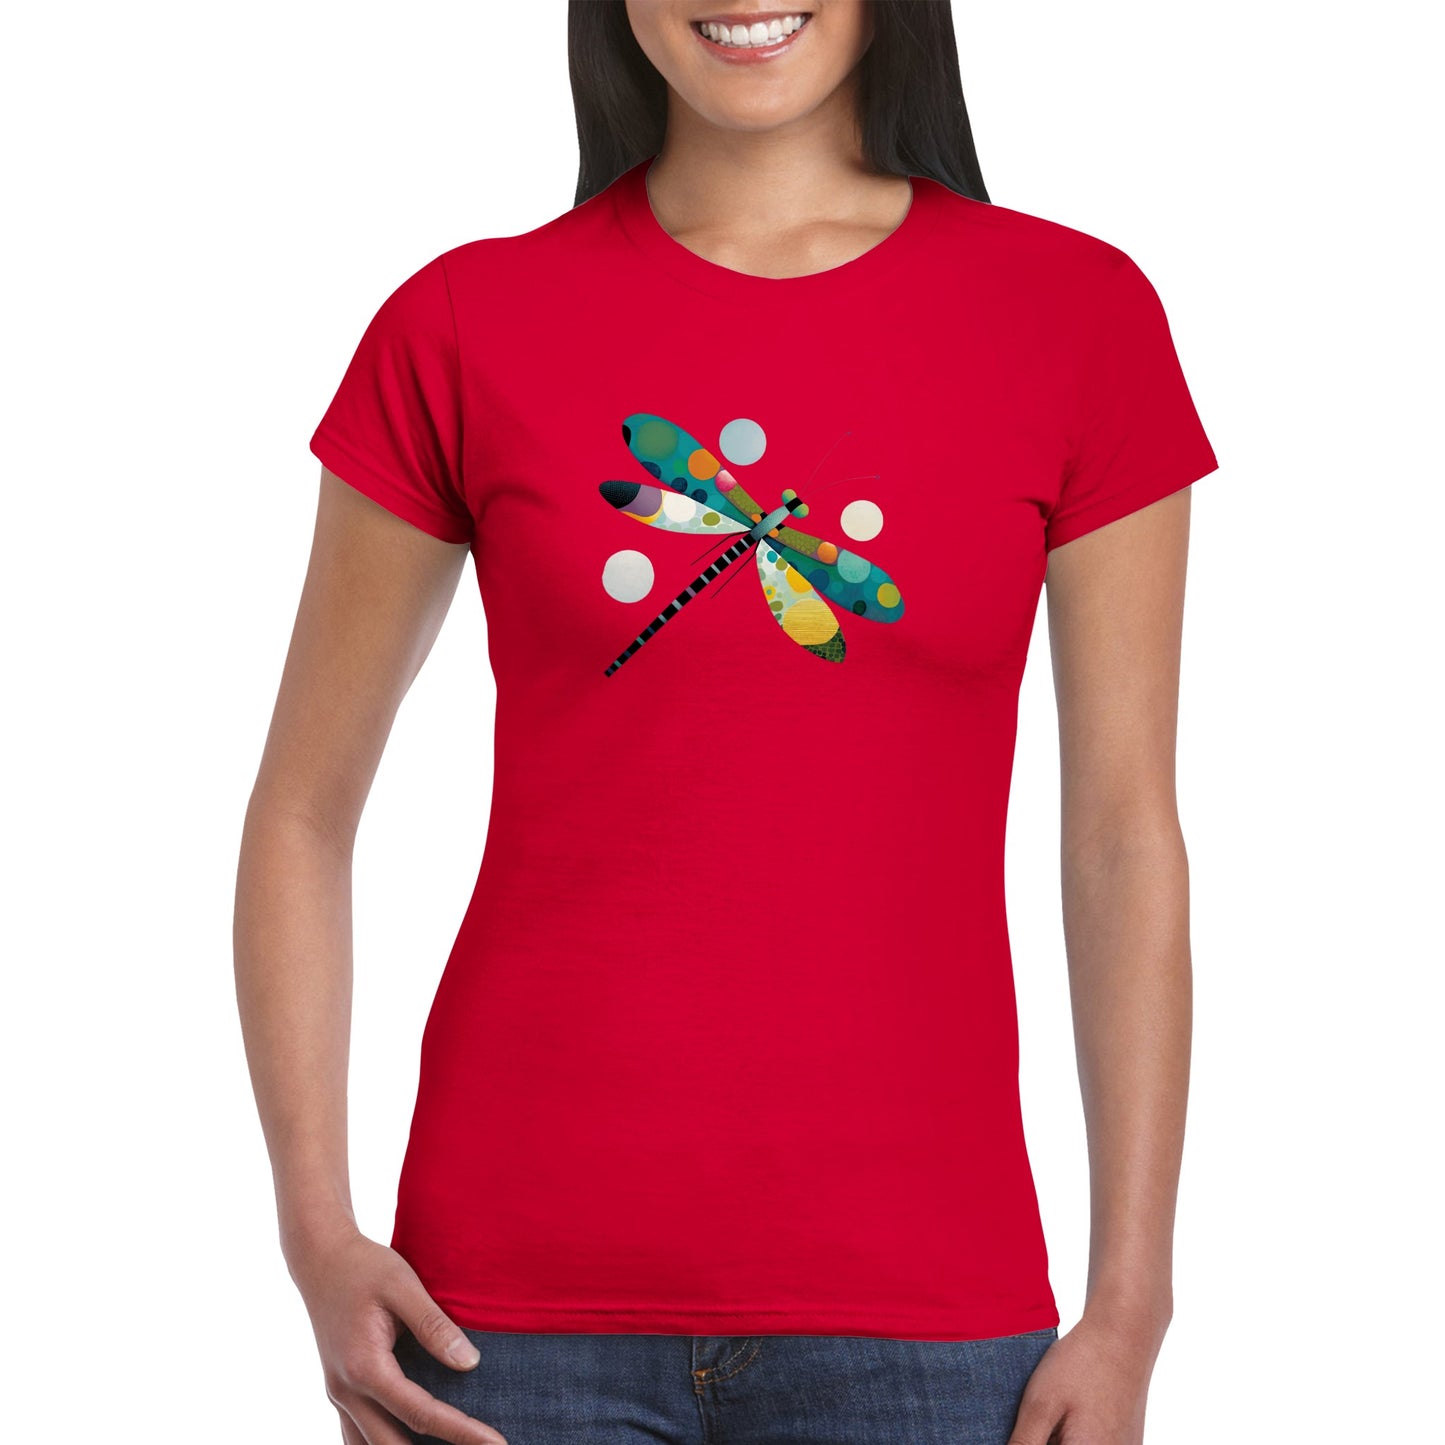 Woman wearing a red t-shirt with an abstract colourful dragonfly print